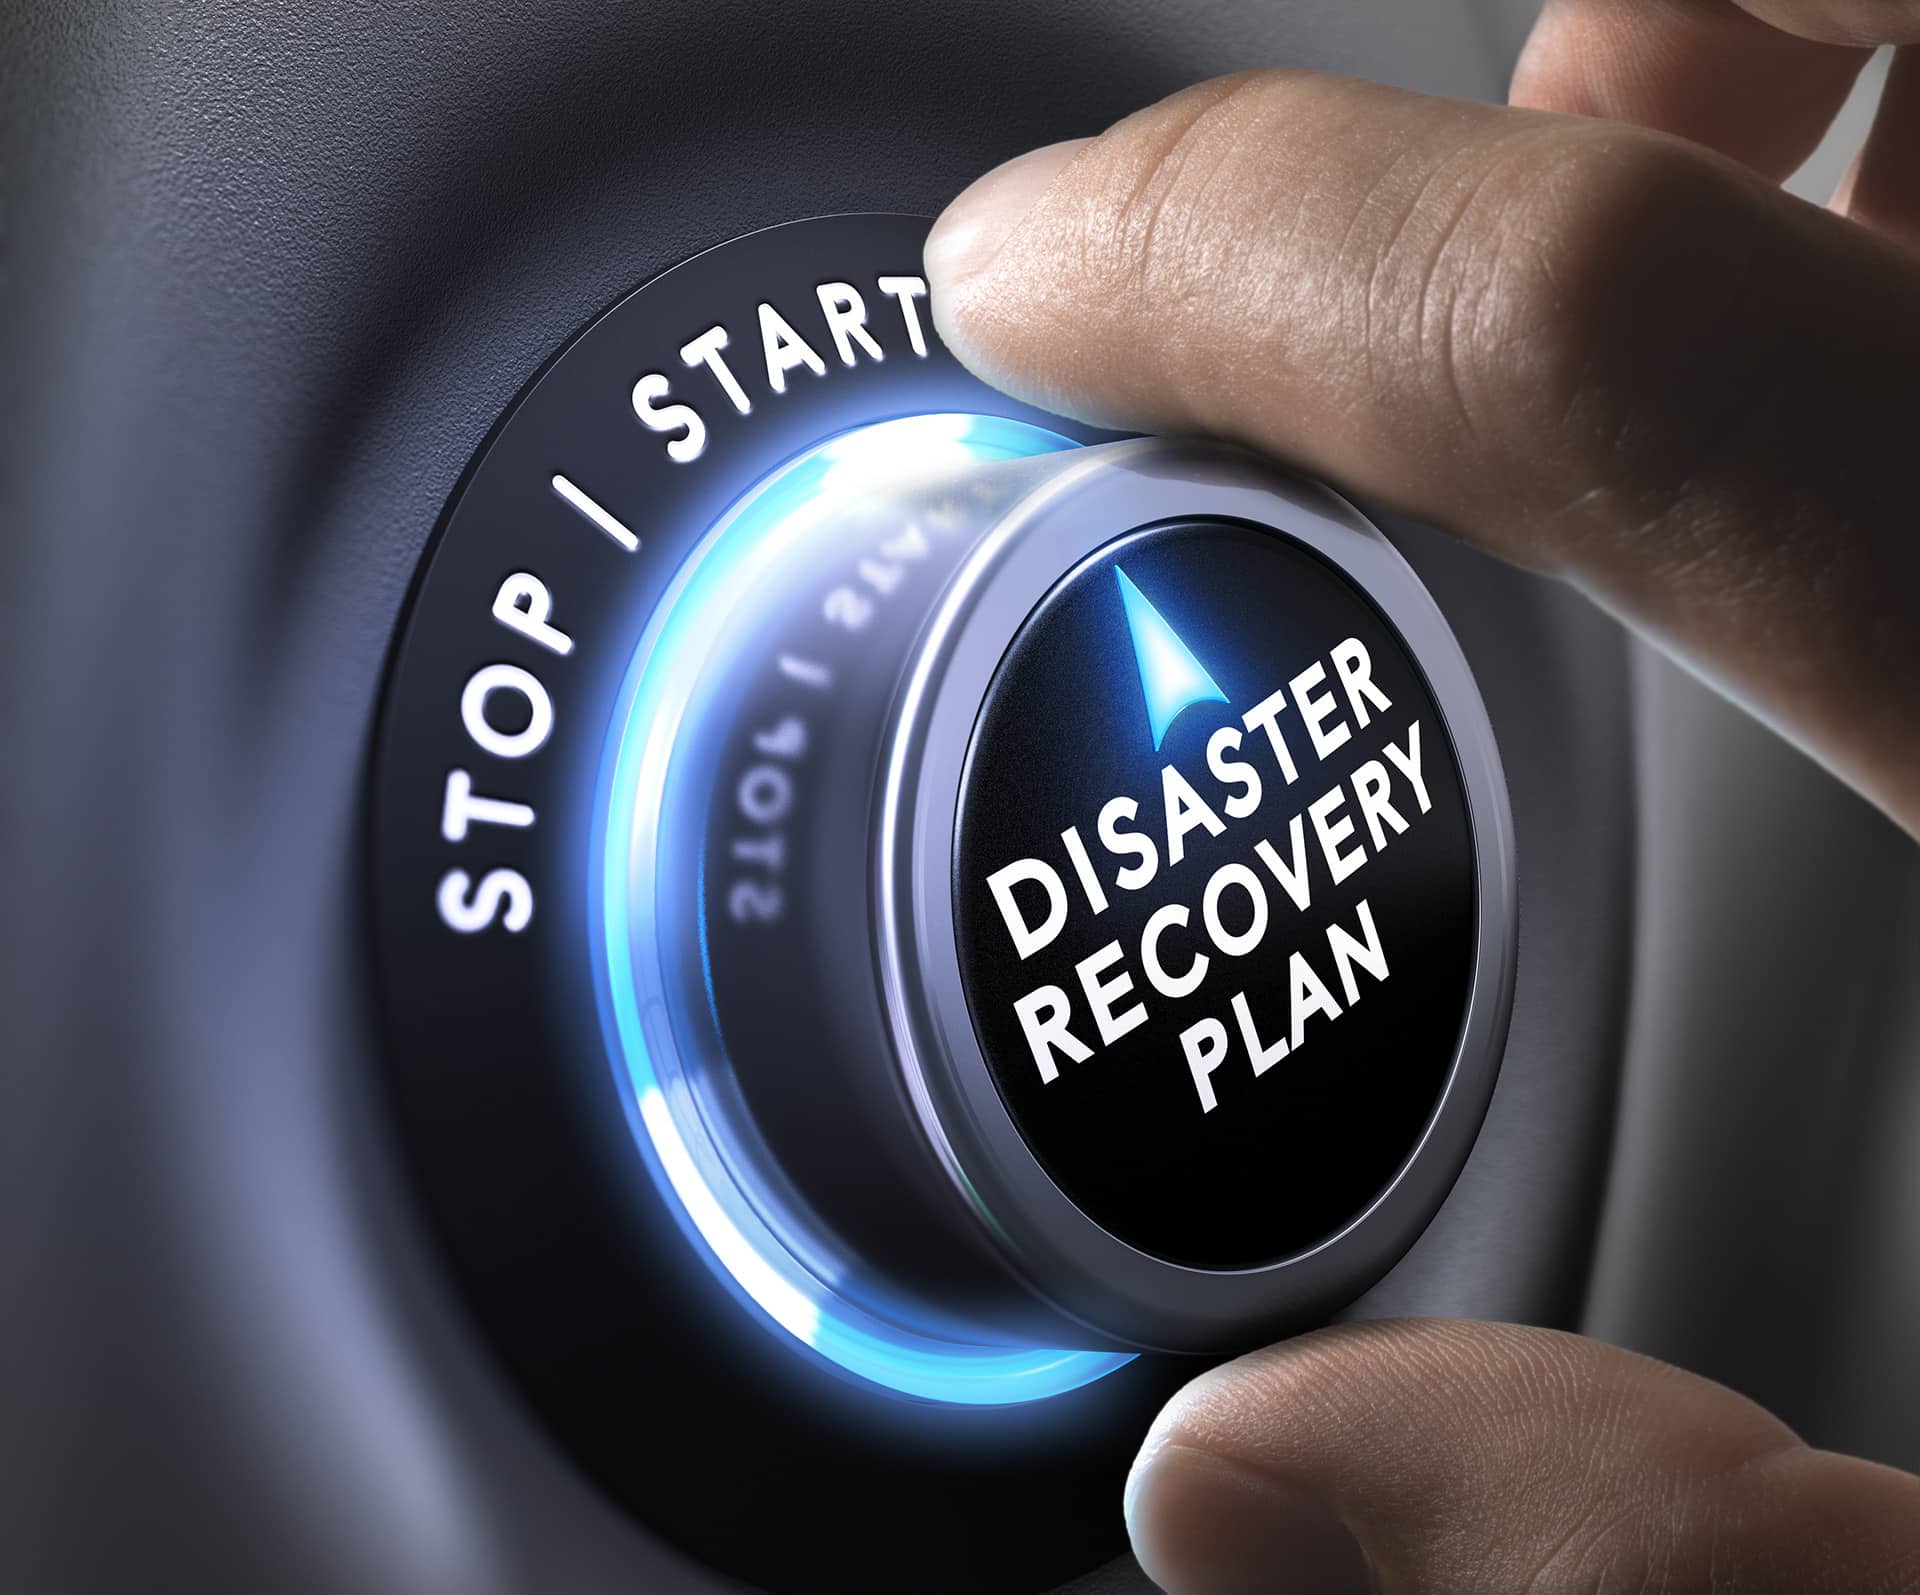 a button that says stop i start disaster recovery plan